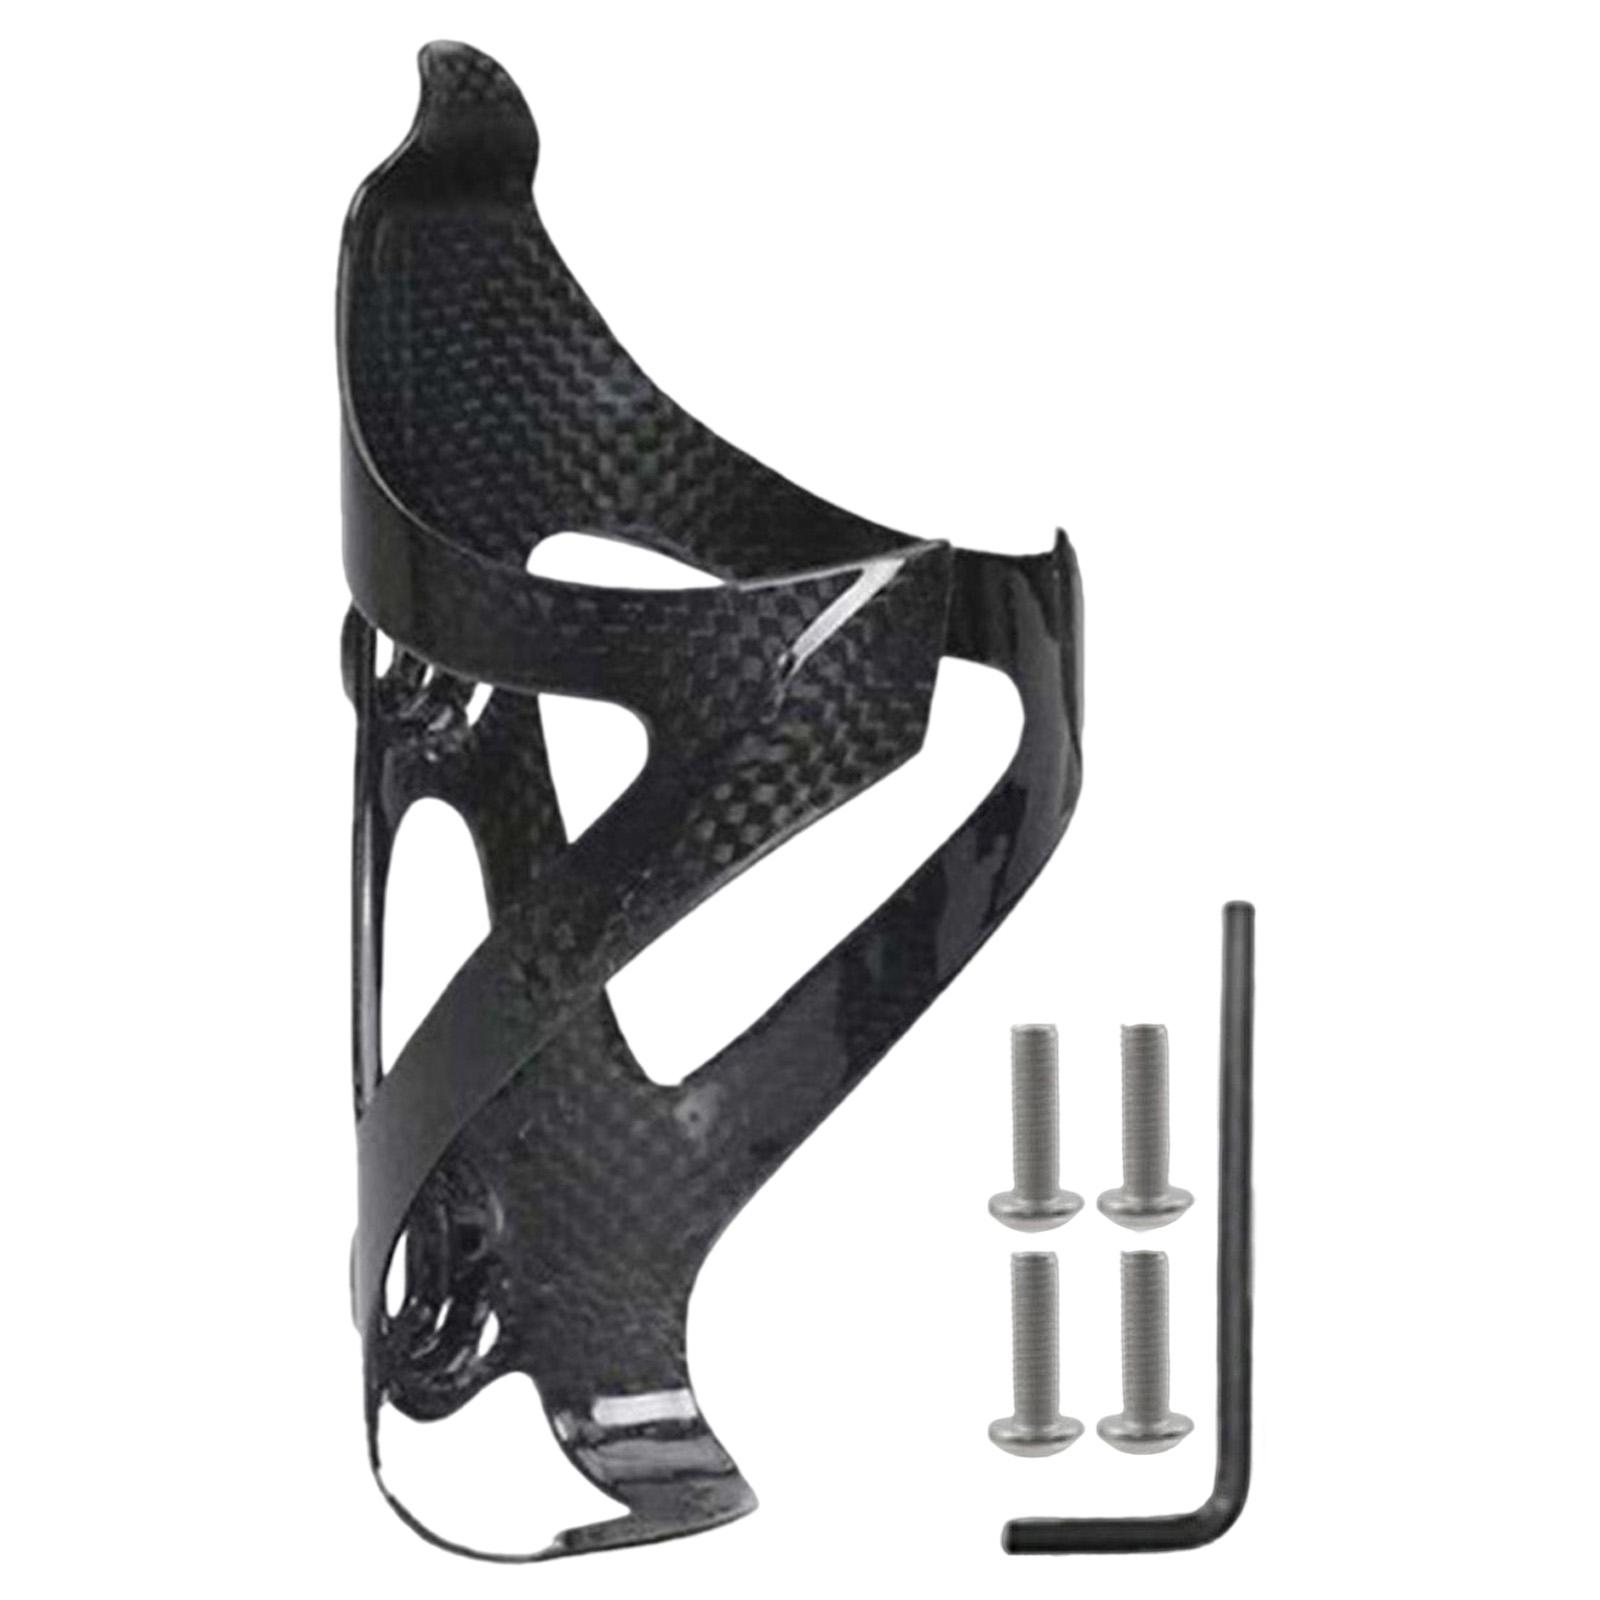 Carbon Fiber Bicycle Water Bottle Cage Drink Cup Holder Lightweight Bright